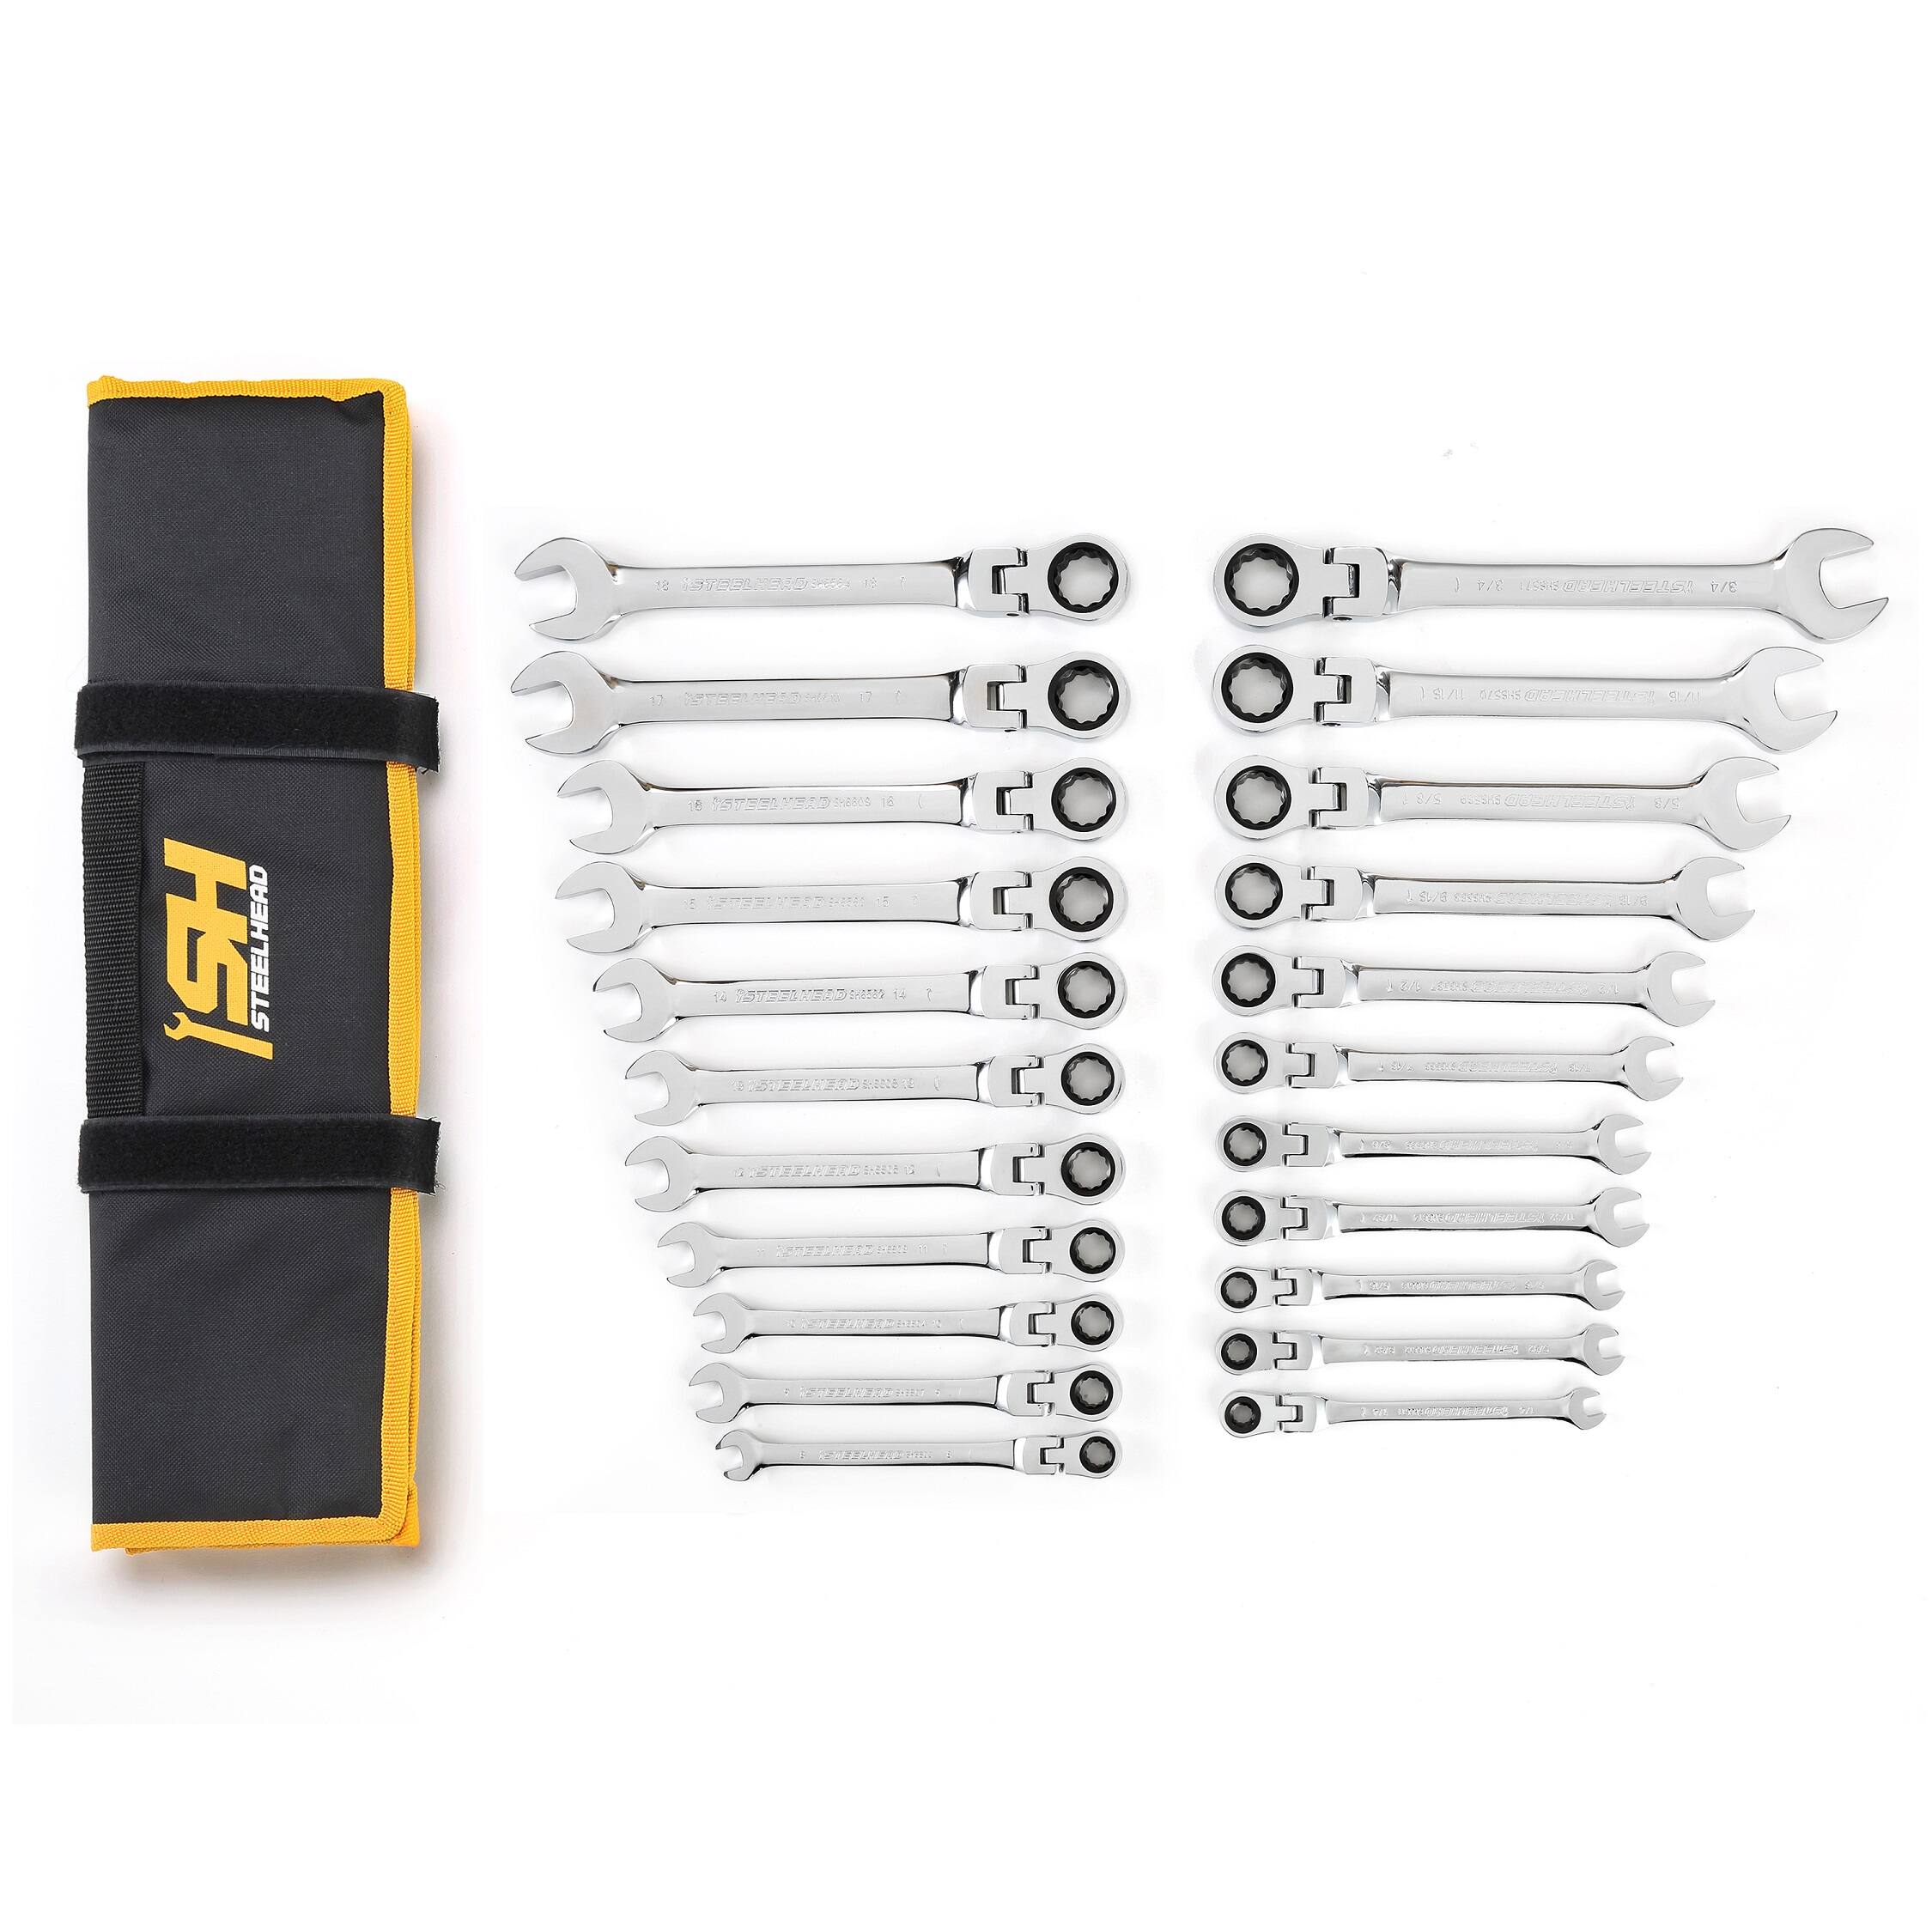 STEELHEAD 22-Piece SAE & Metric 12-Point Solid & Flex-Head Ratcheting Combination Wrench Sets (SAE: 1/4-3/4”, Metric: 8-18mm), Chrome Vanadium, 72-Tooth Gearing from $44.99